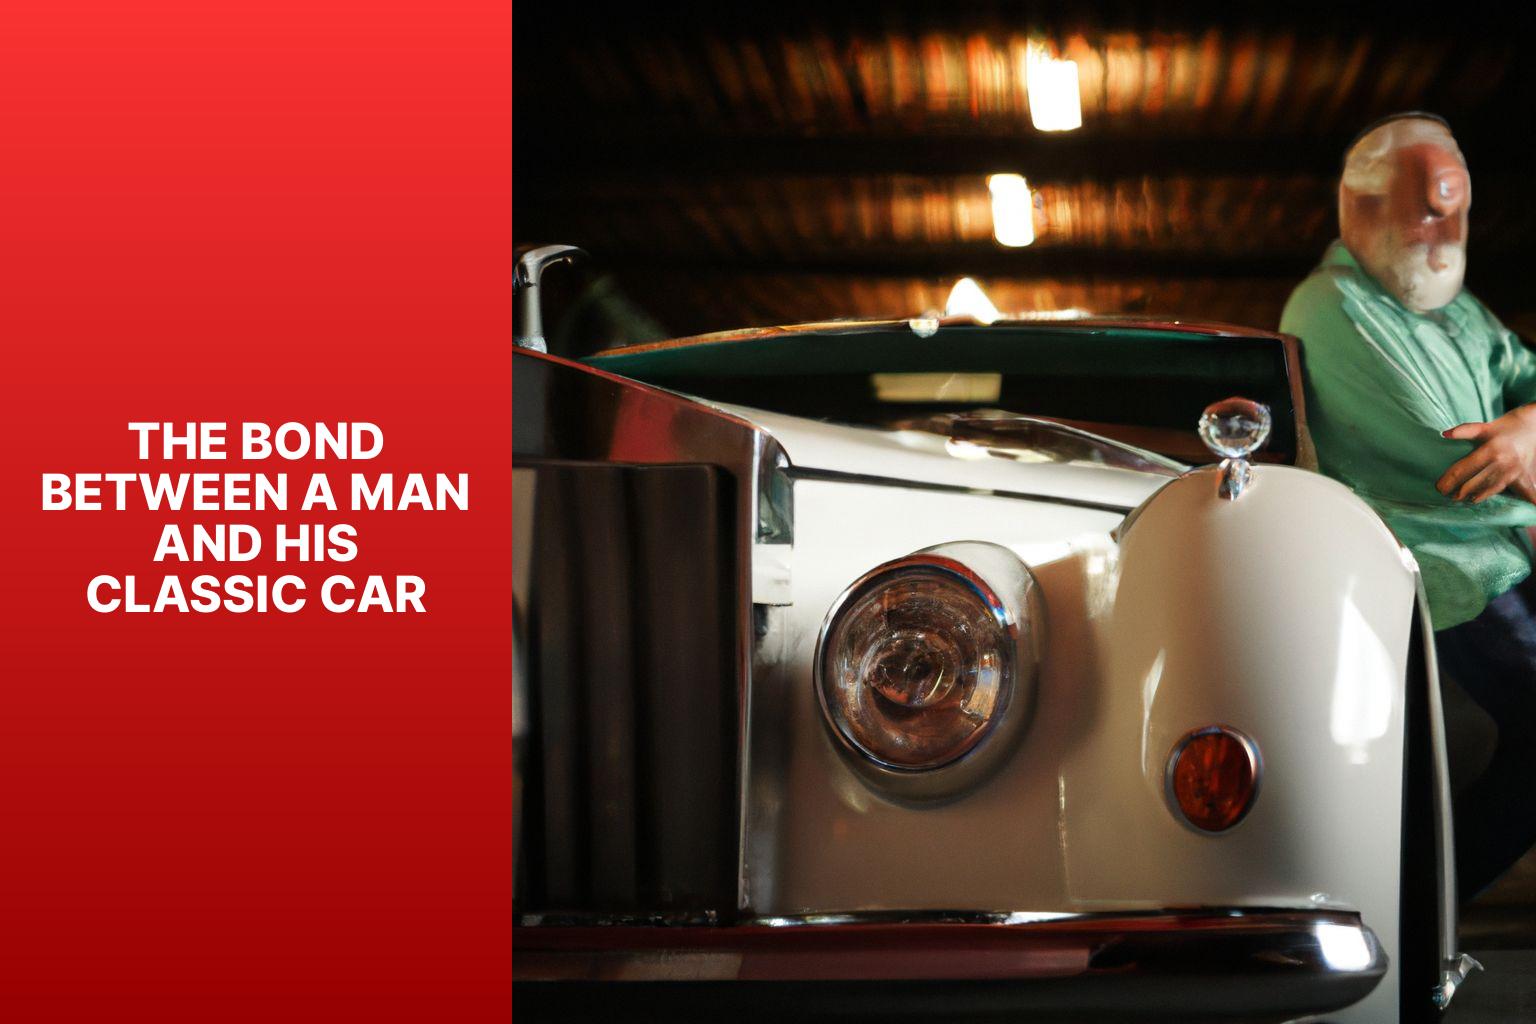 The Bond Between a Man and His Classic Car